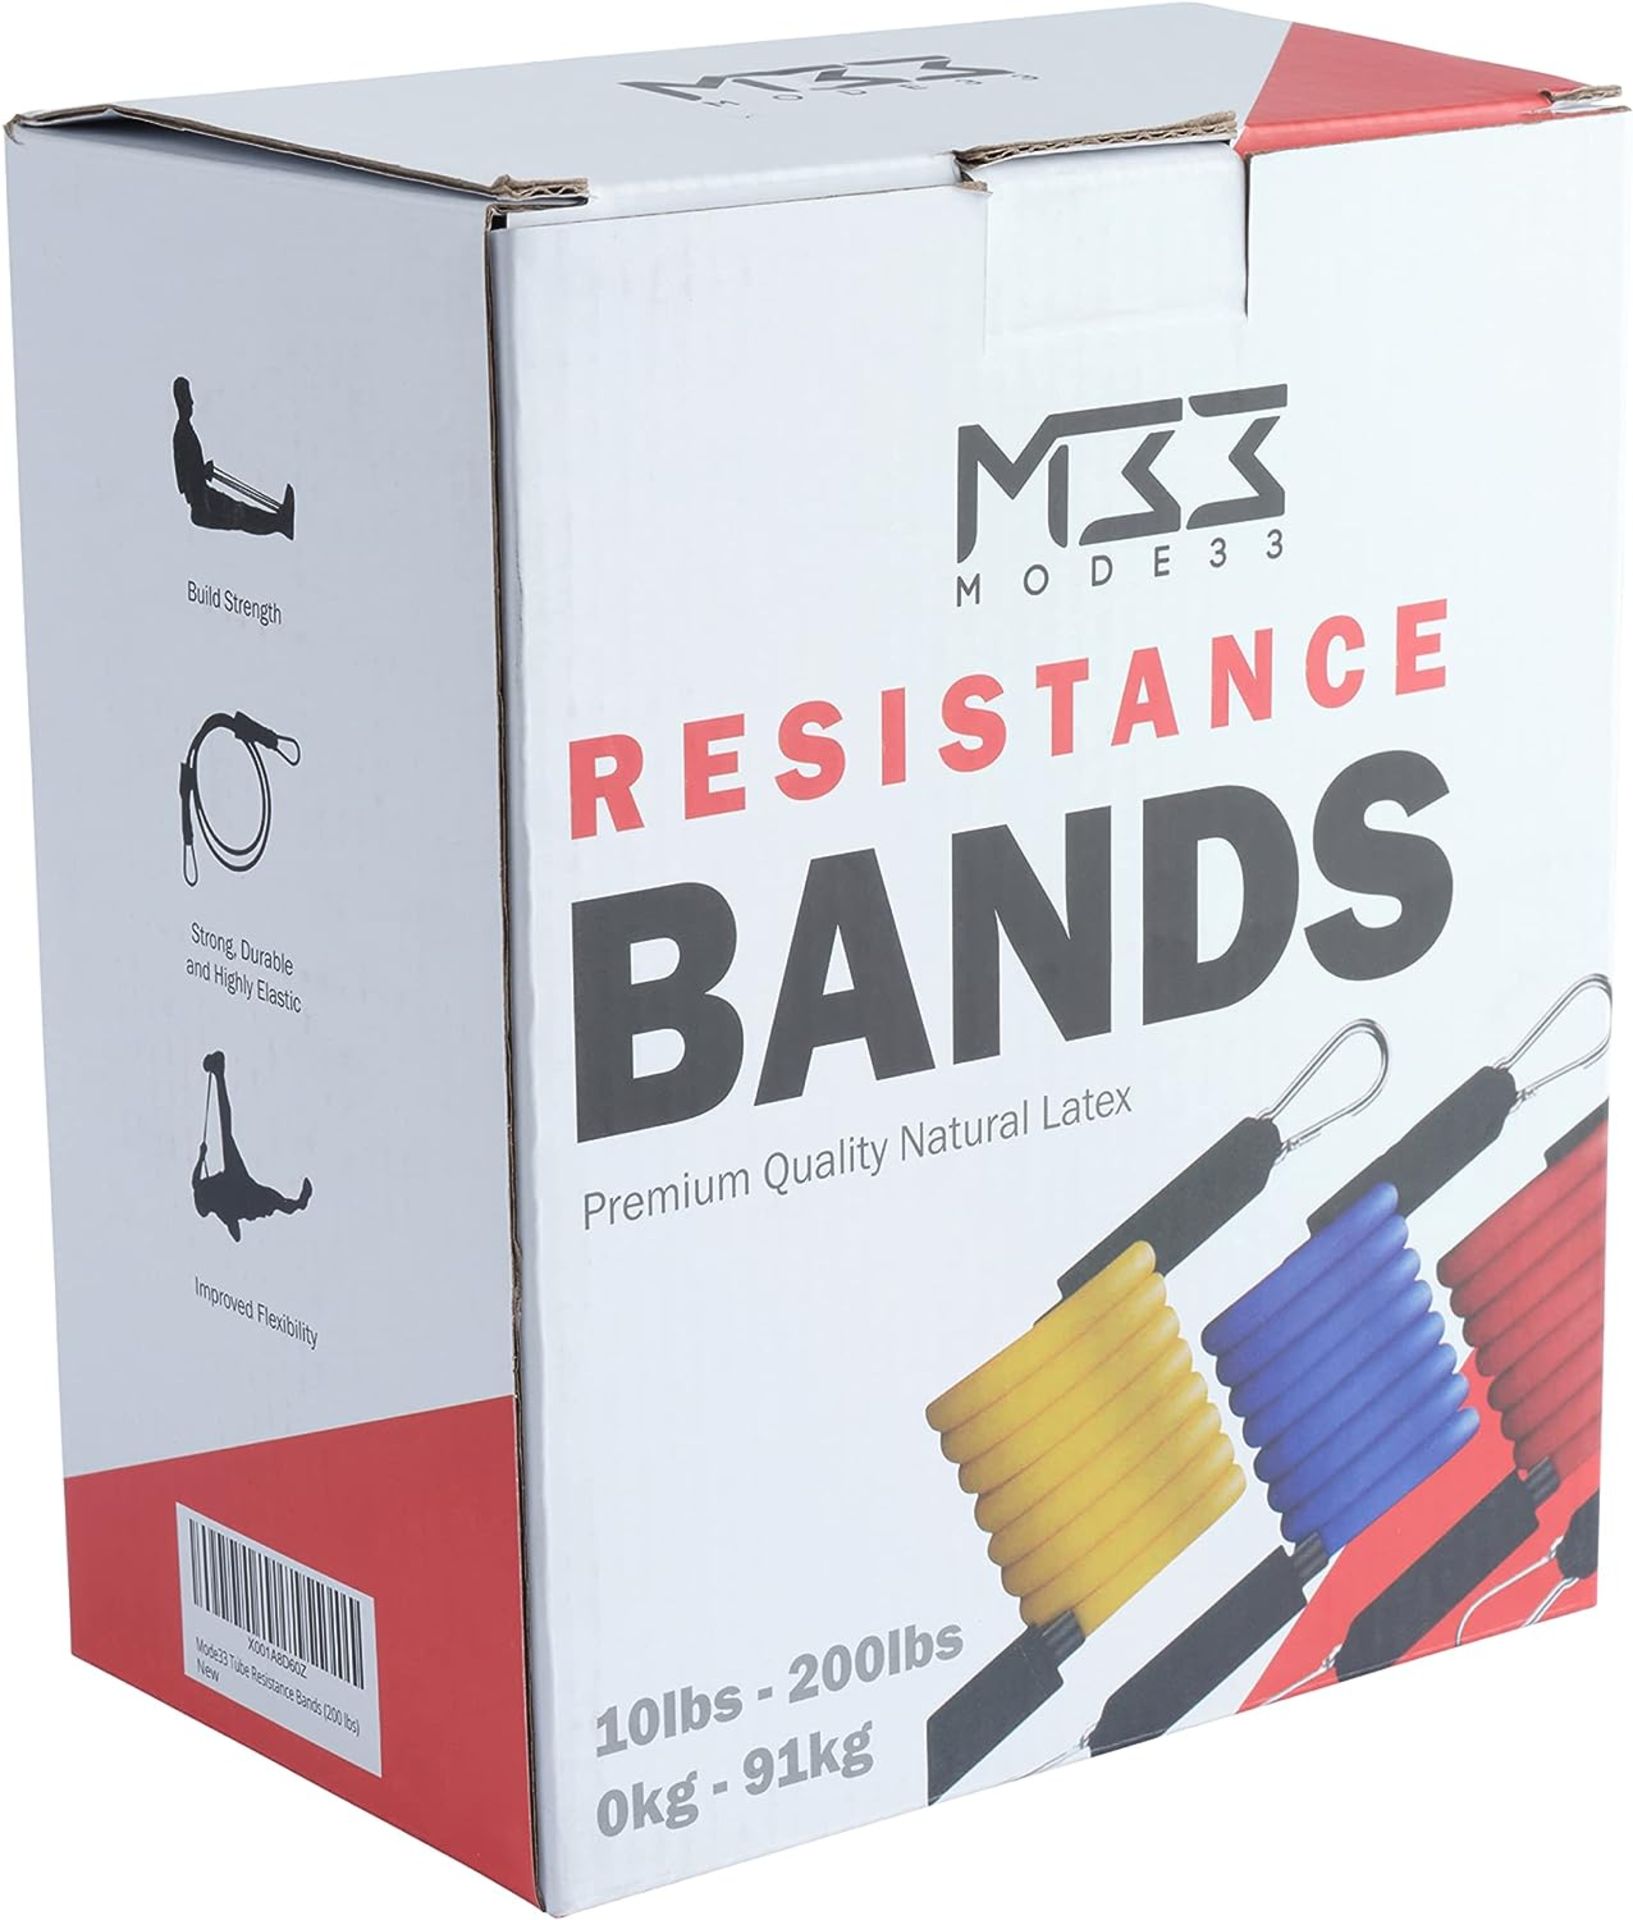 10 x NEW Mode33 Resistance Bands Set 100lbs â€“ Premium Latex Exercise Bands - RRP Â£169.90 ! - Image 3 of 7